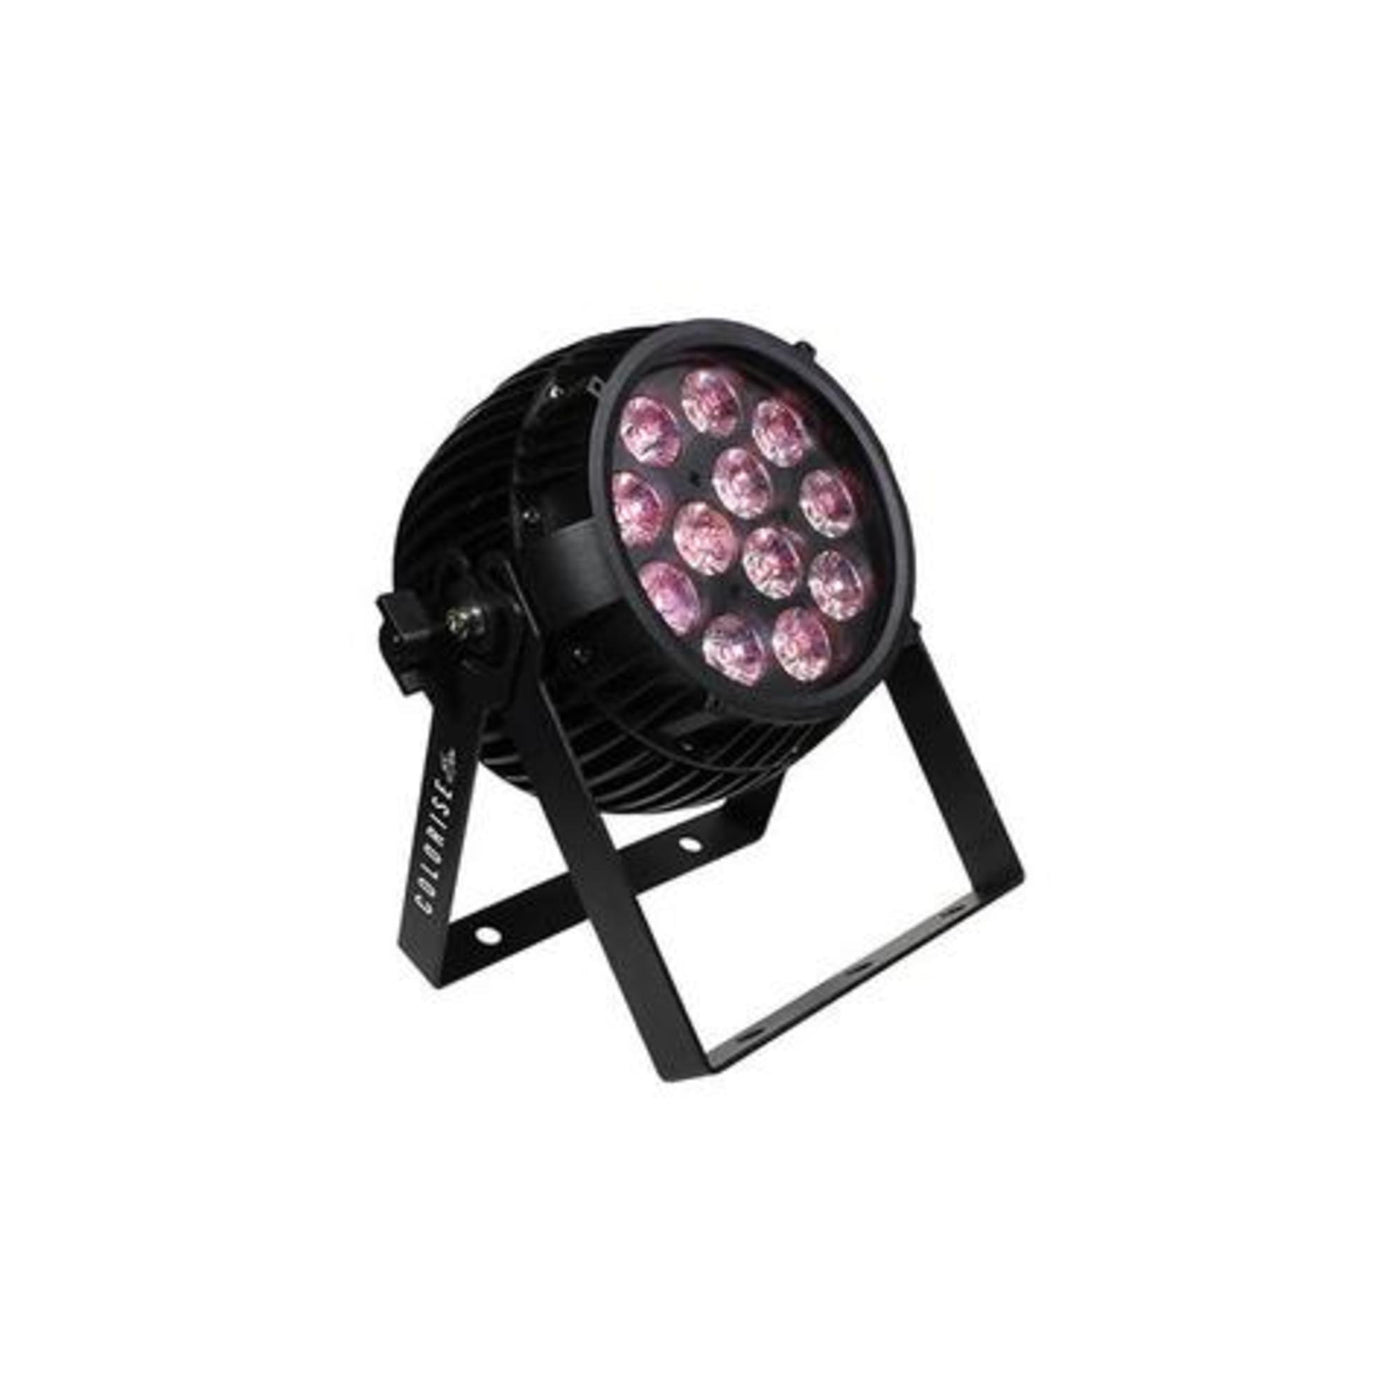 Blizzard 123920 Colorise™ EXA LED PAR Fixture with 12x 15W 6-in-1 RGBAW+UV LEDs, Black Housing